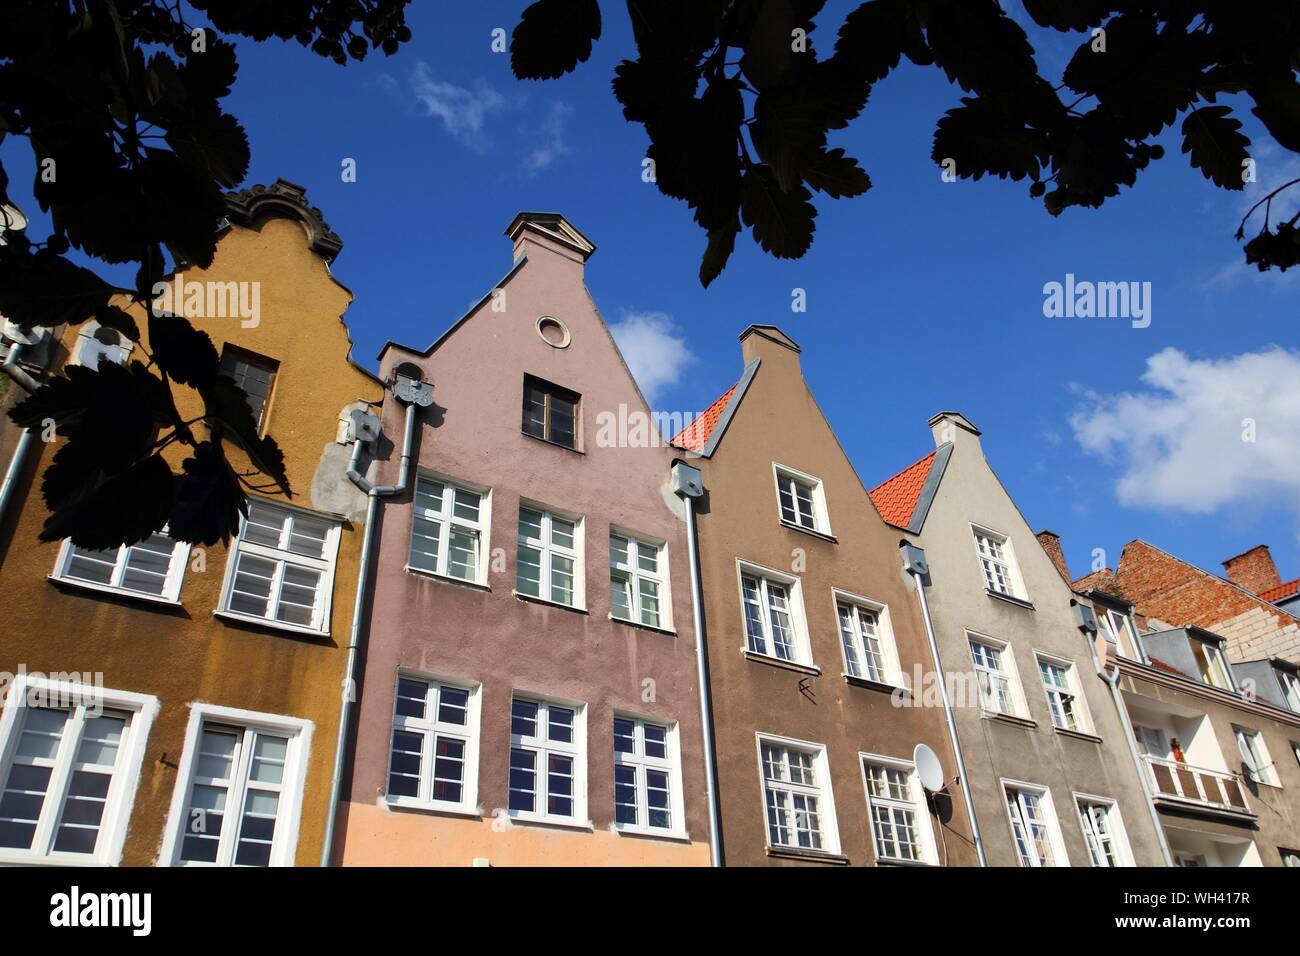 Poland - Gdansk city (also know nas Danzig) in Pomerania region. Typical apartment buildings. Stock Photo